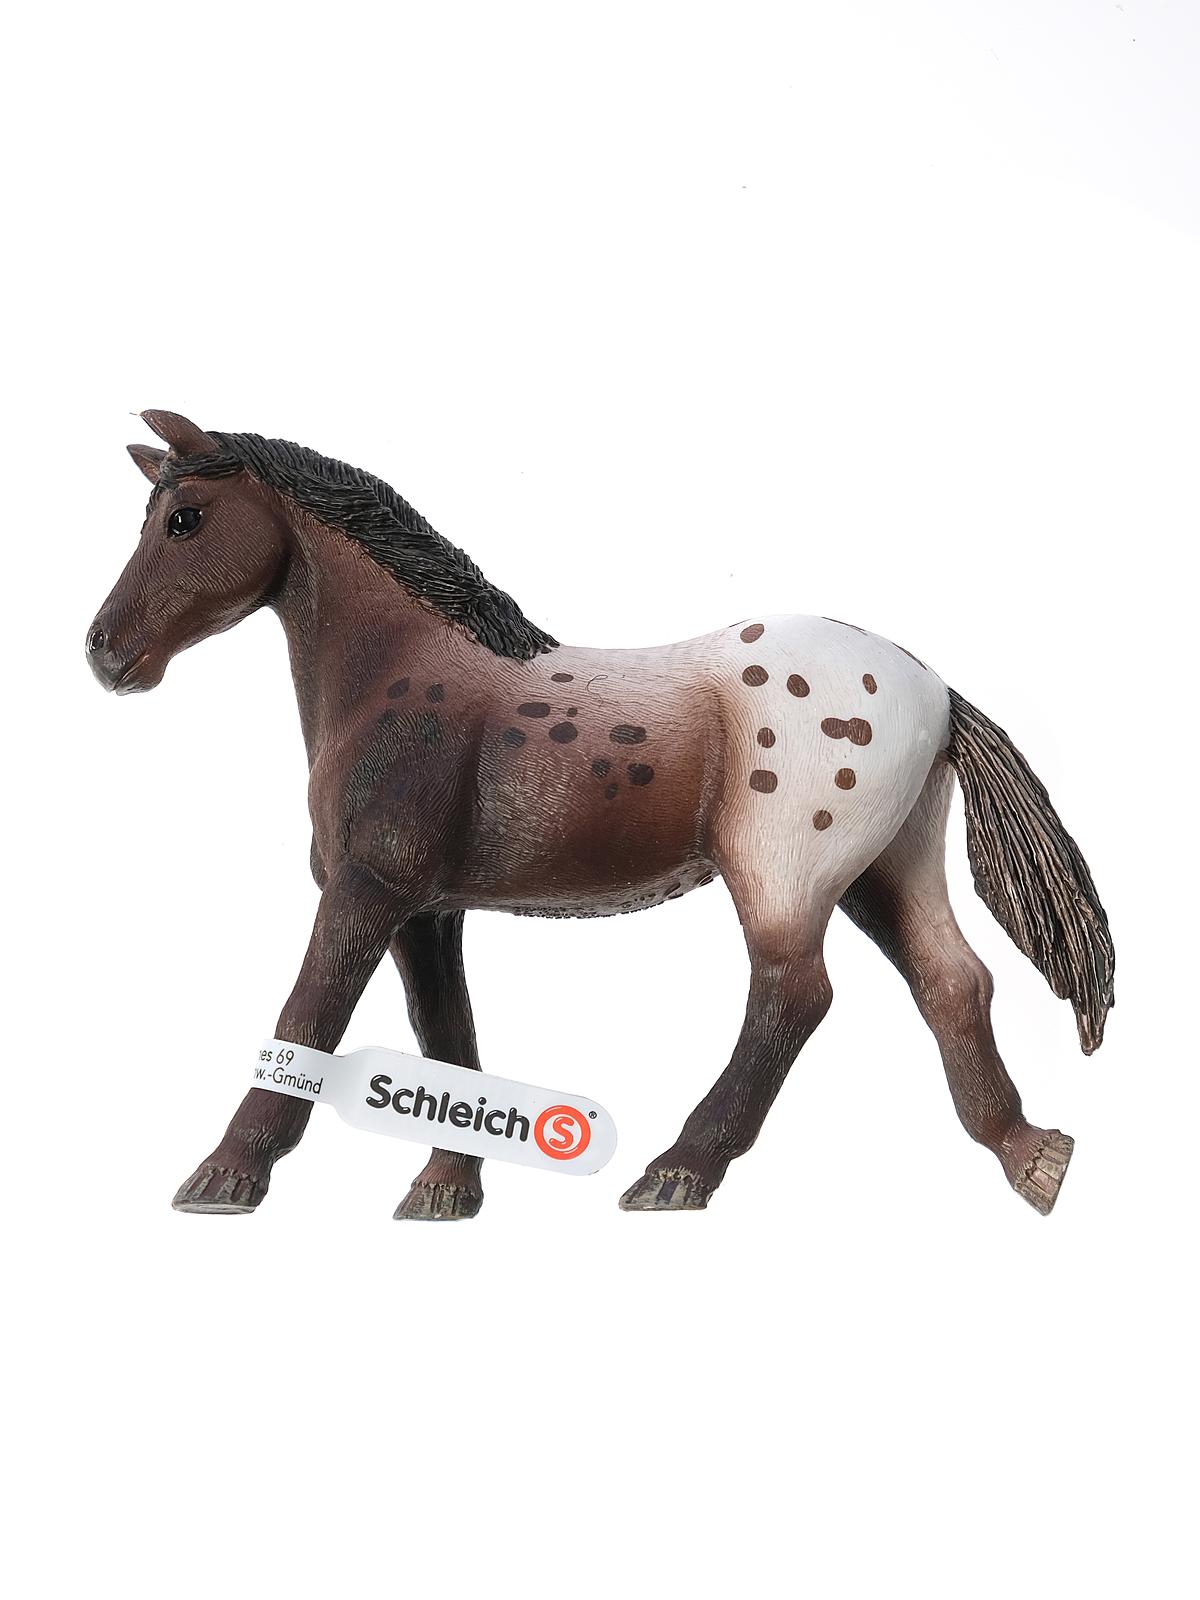 Appaloosa Spotted Horse Simulation Model Figure Kids Toy Home Decoration 